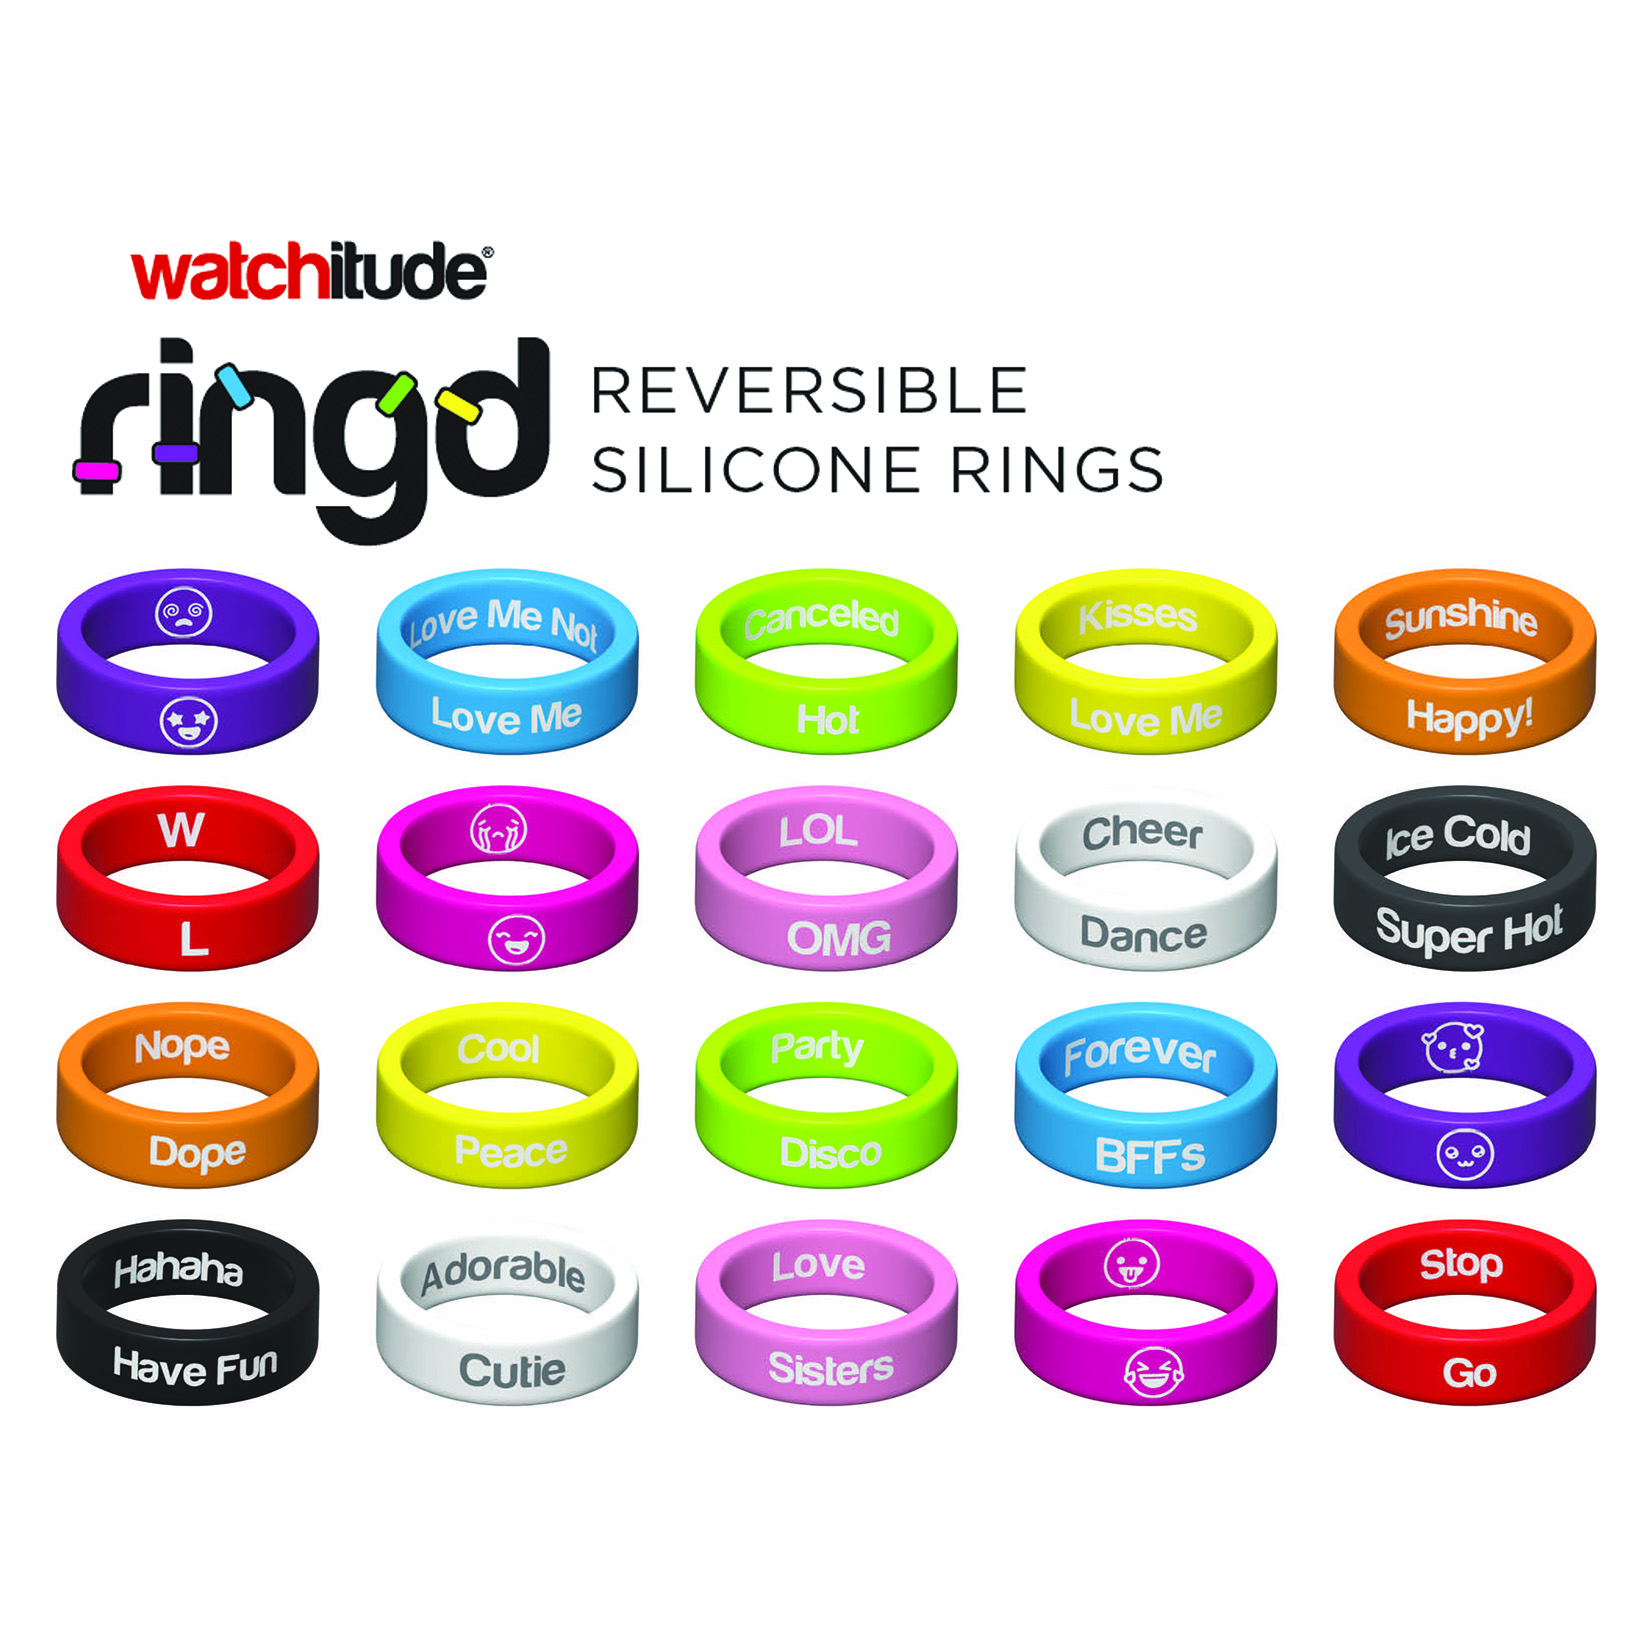 Ring'd - Reversible Silicone Rings by Watchitude - Assorted 4 pack